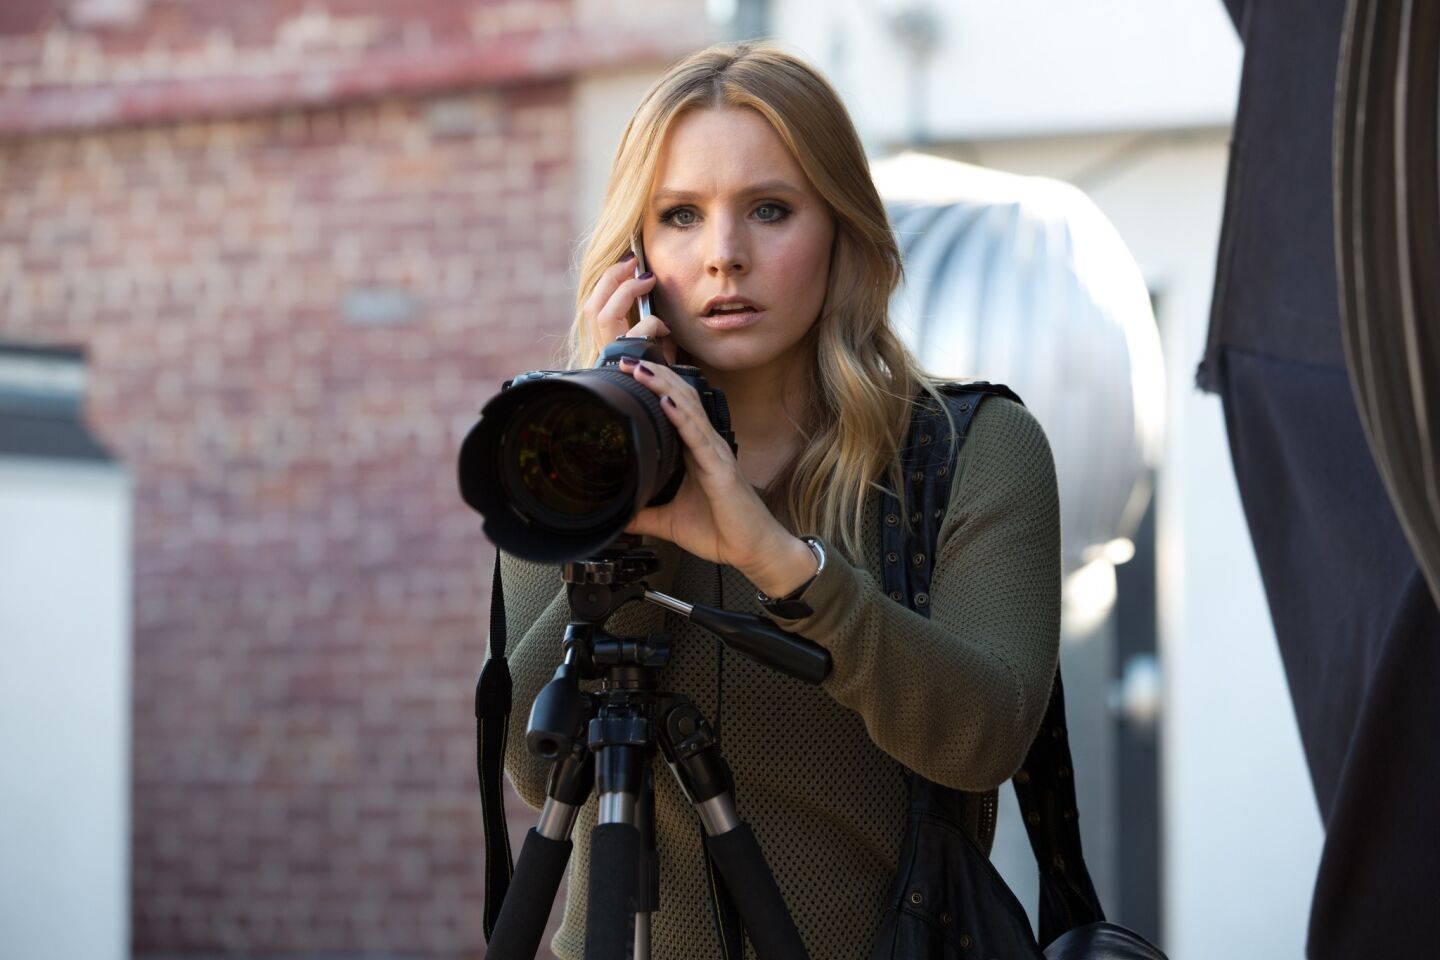 The beloved fan favorite TV series "Veronica Mars" finally made its much-heralded return, this time on the silver screen. Thanks to overwhelming fan support via a Kickstarter campaign last year, everyone's favorite teen (now young adult) sleuth is back on the case. While the phenomenon of TV properties making the leap to the big screen -- and vice versa -- isn't unique in Hollywood, it is rare for the entire original cast to make the leap between screens. But the graduating class of Neptune High does join a small but elite group of casts. See who else made the leap.